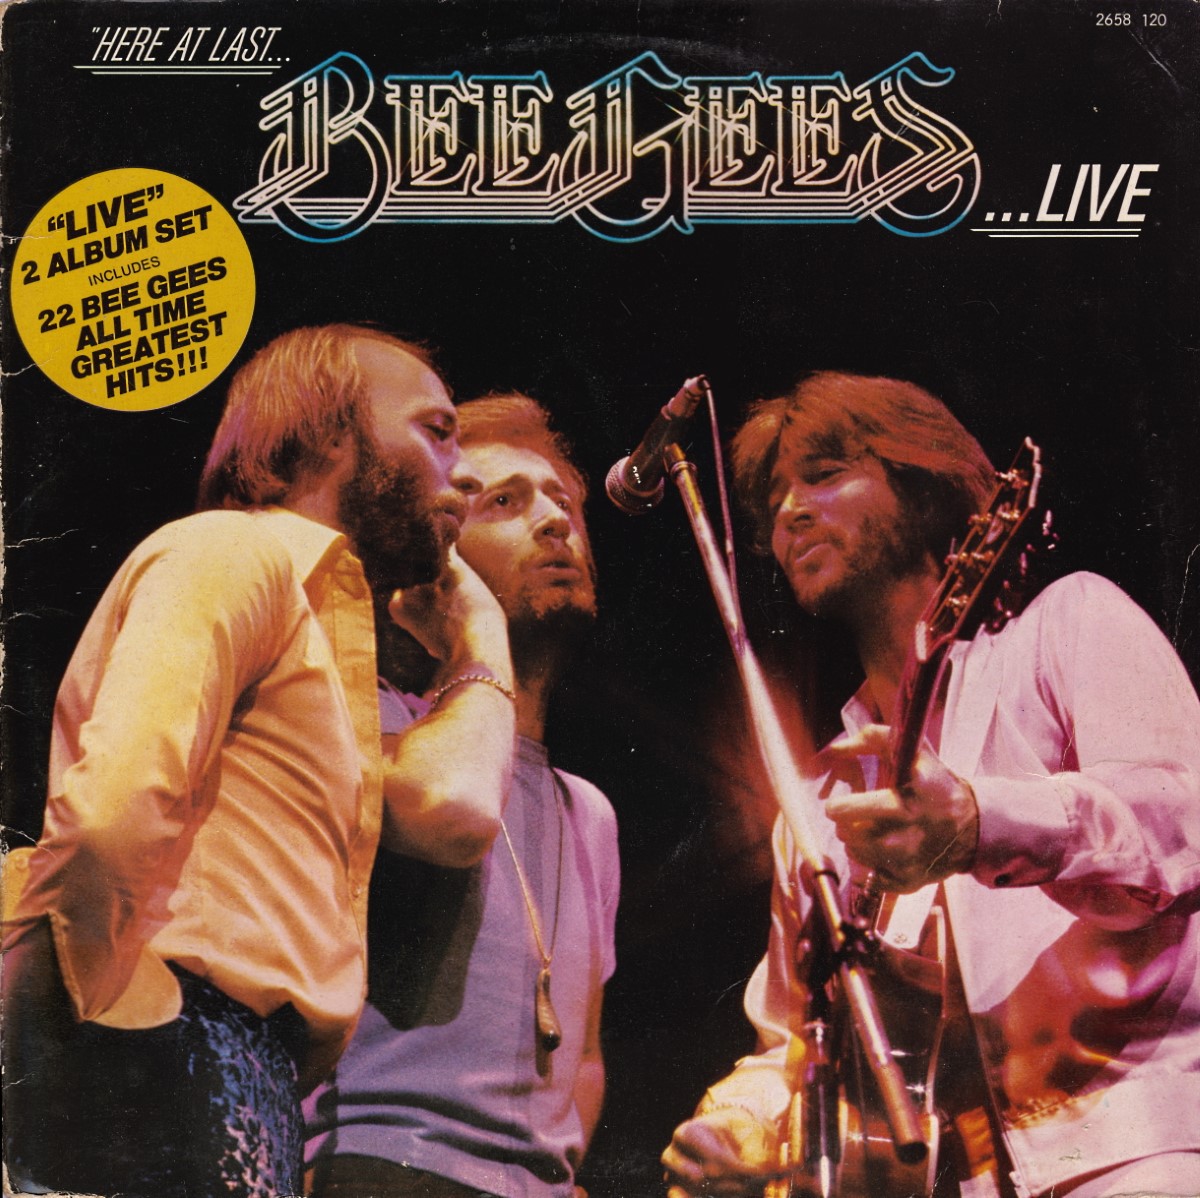 Bee Gees - Here At Last ... Live (1977)